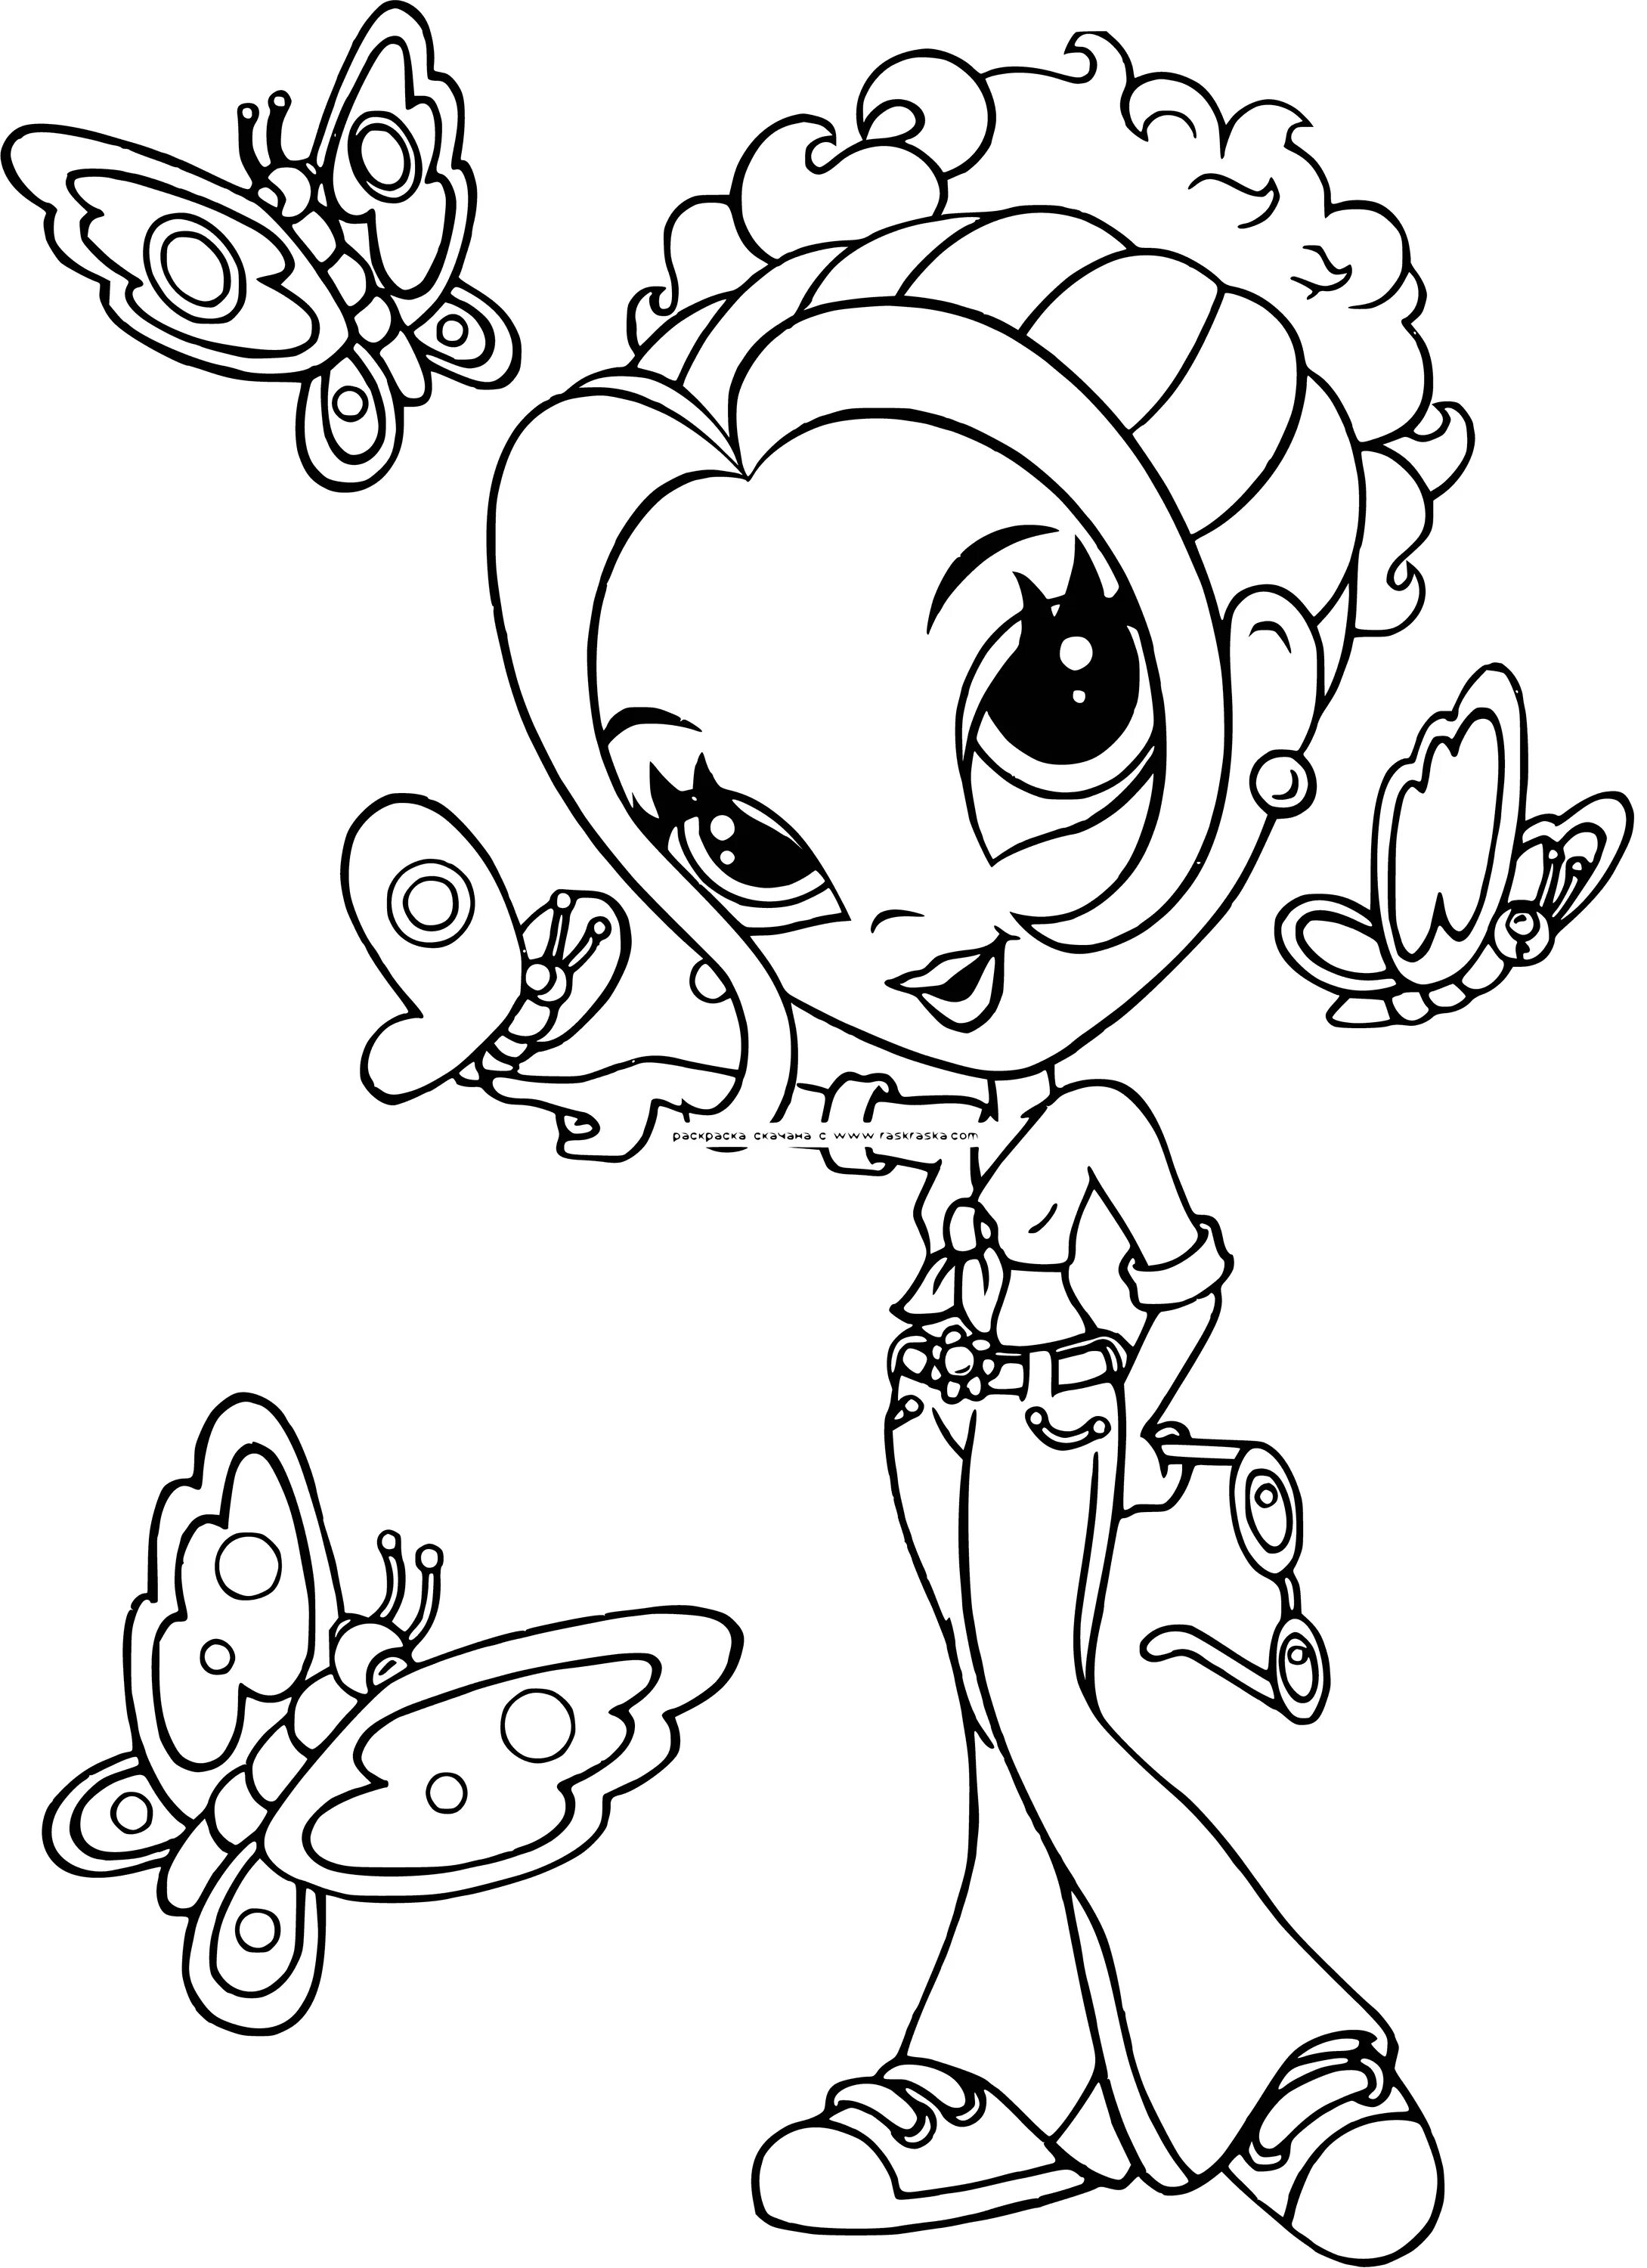 Coloring-illusions coloring page